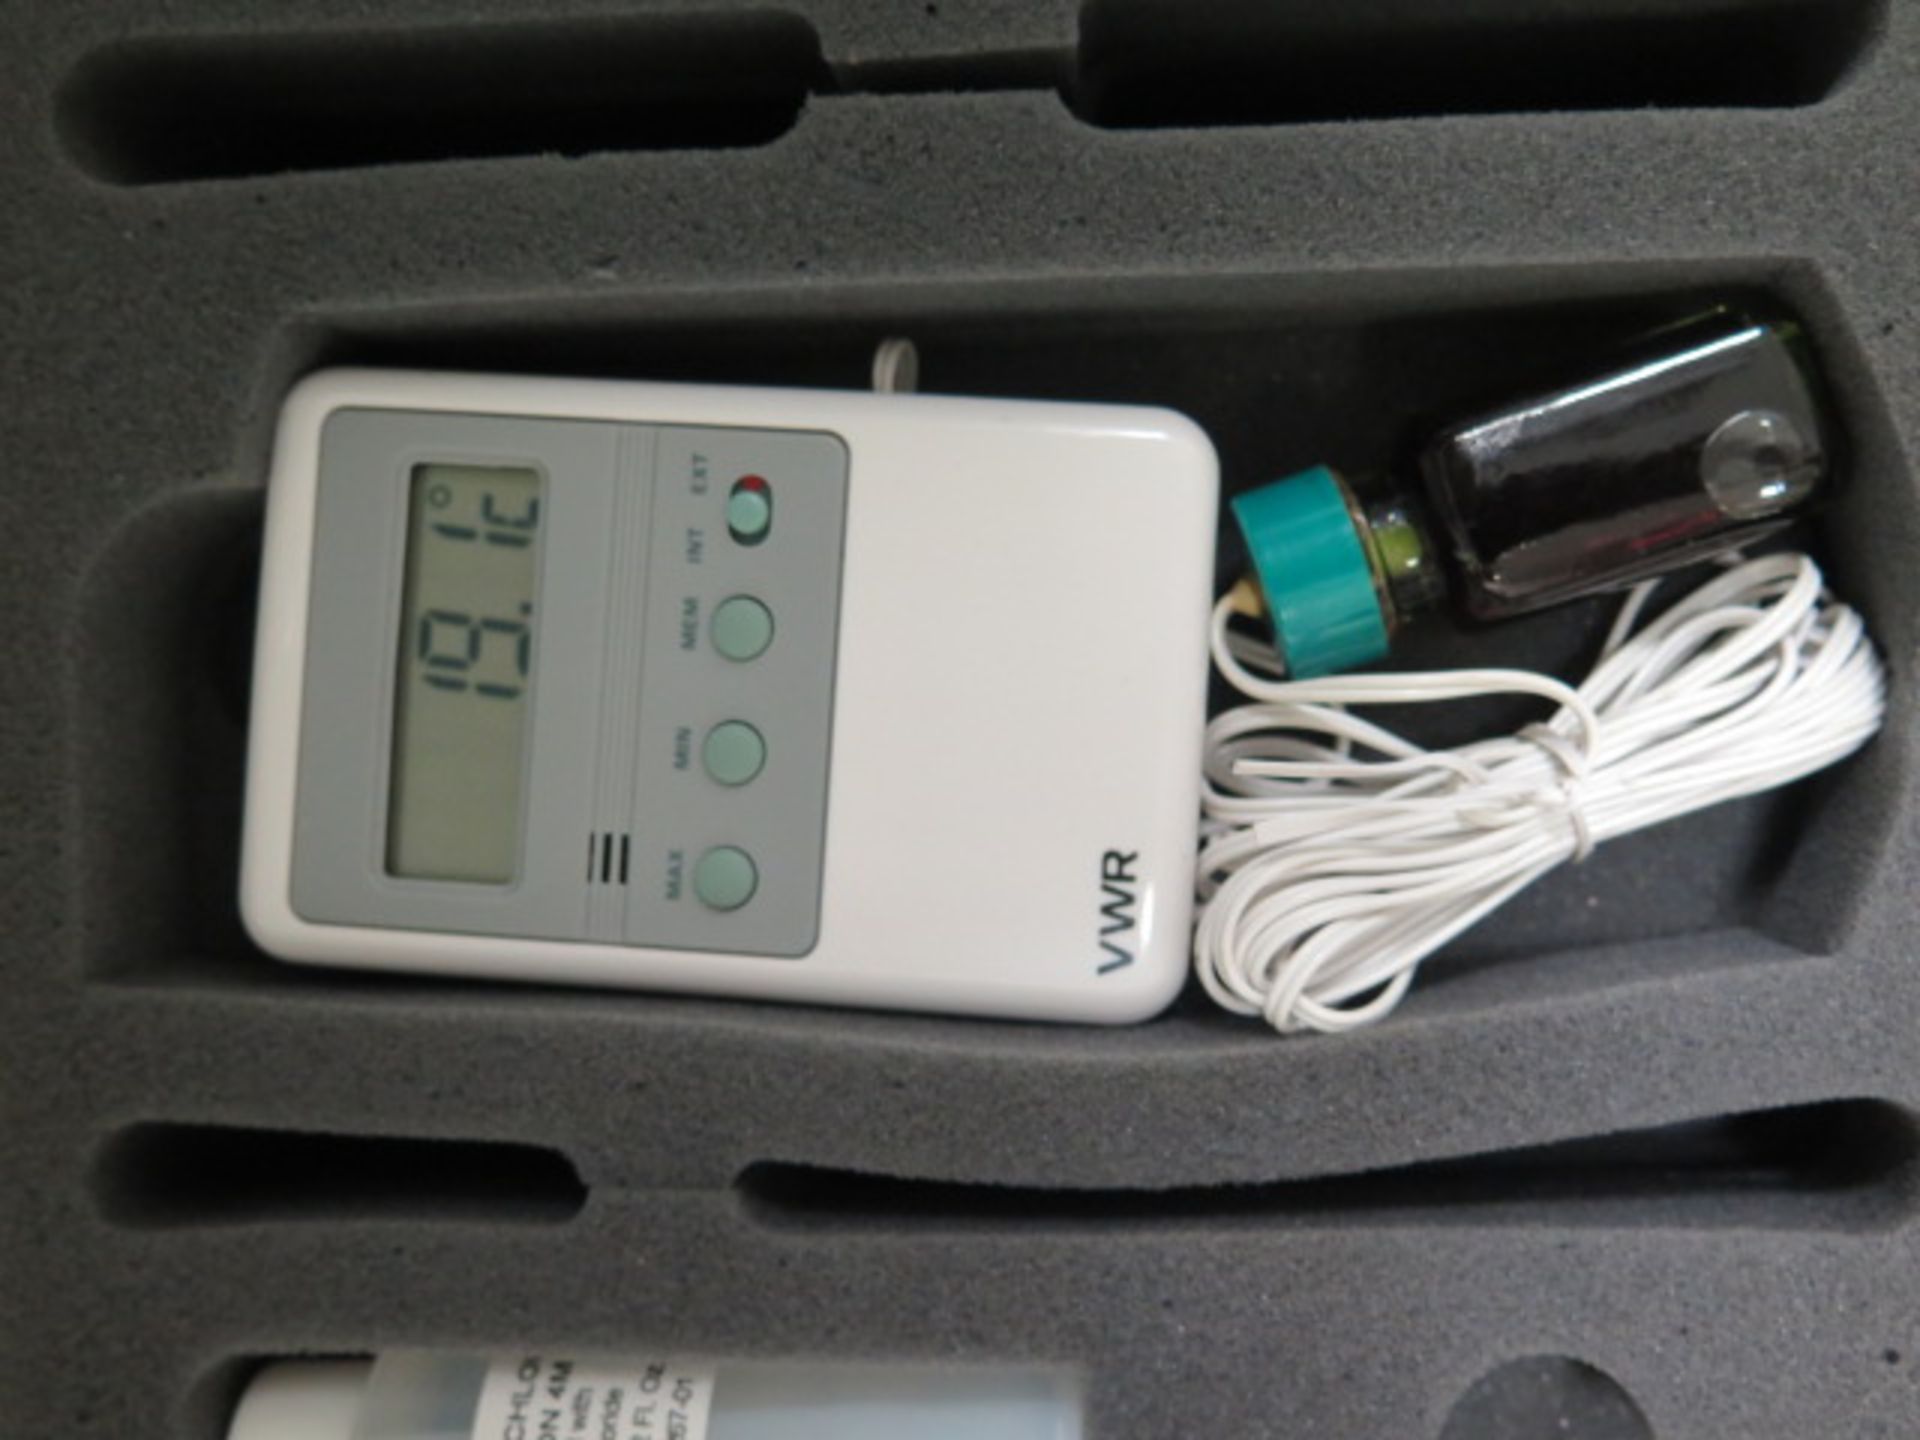 VWR Digital Thermometer (SOLD AS-IS - NO WARRANTY) - Image 3 of 5